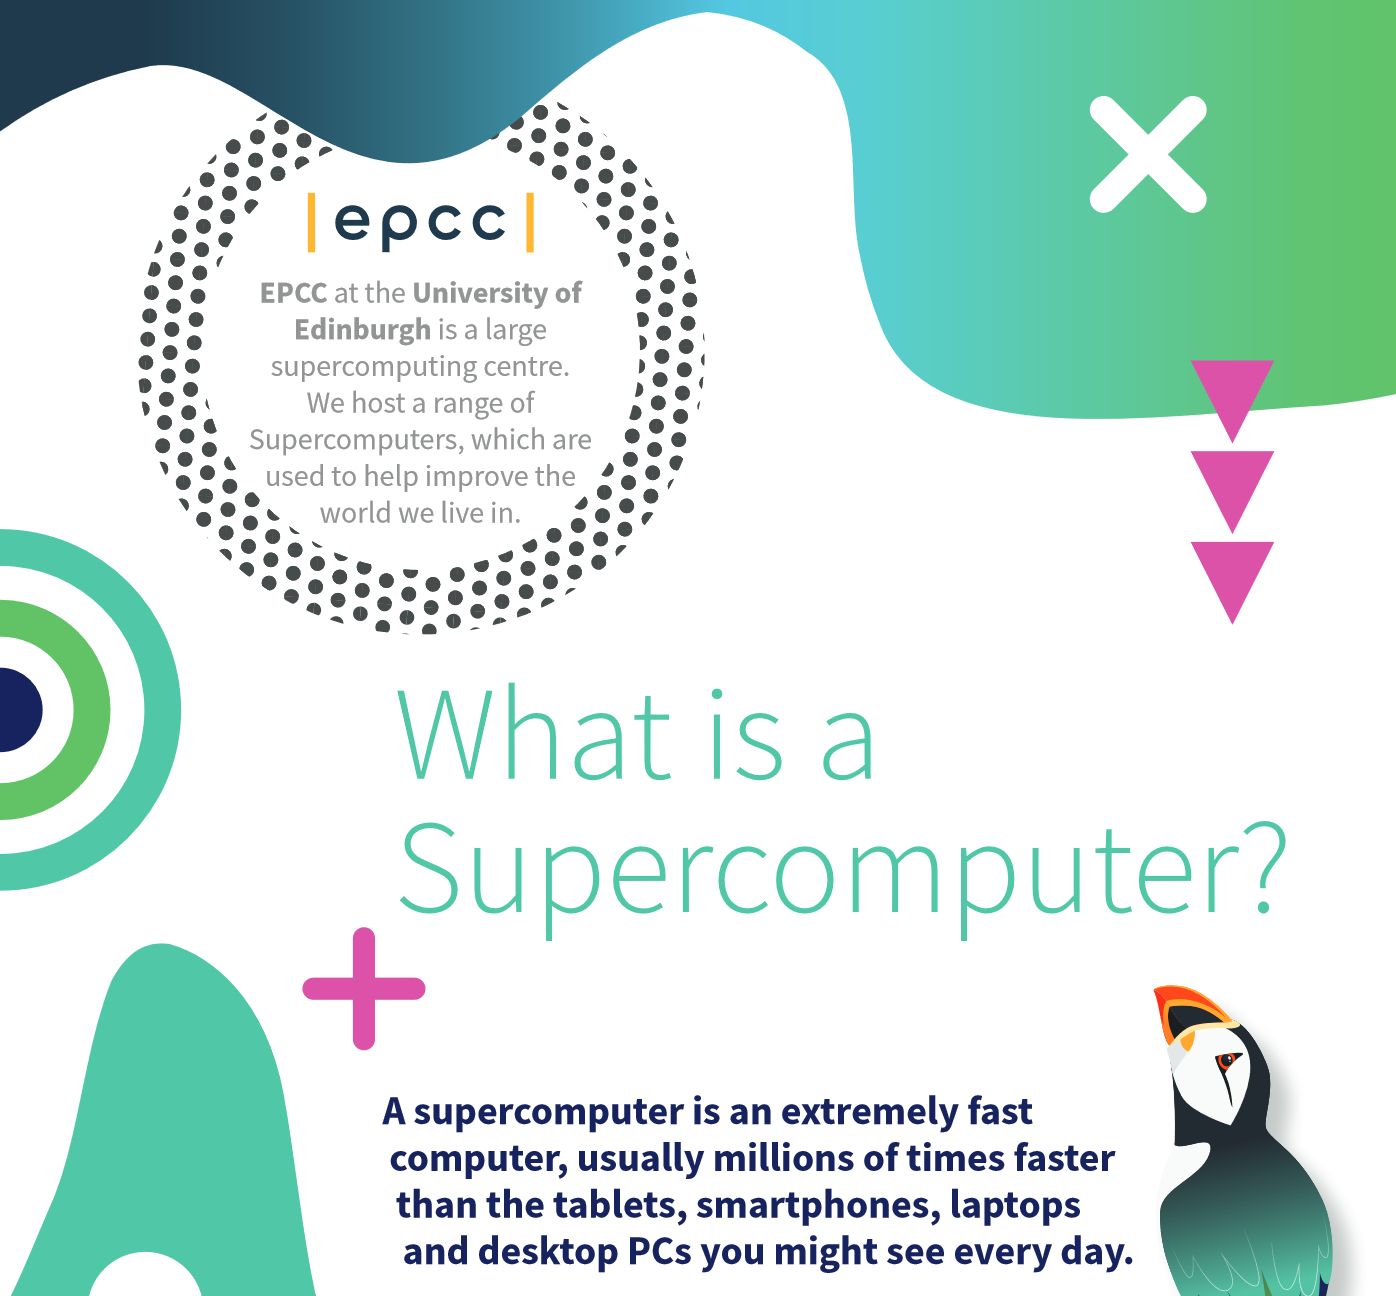 What is a Supercomputer?